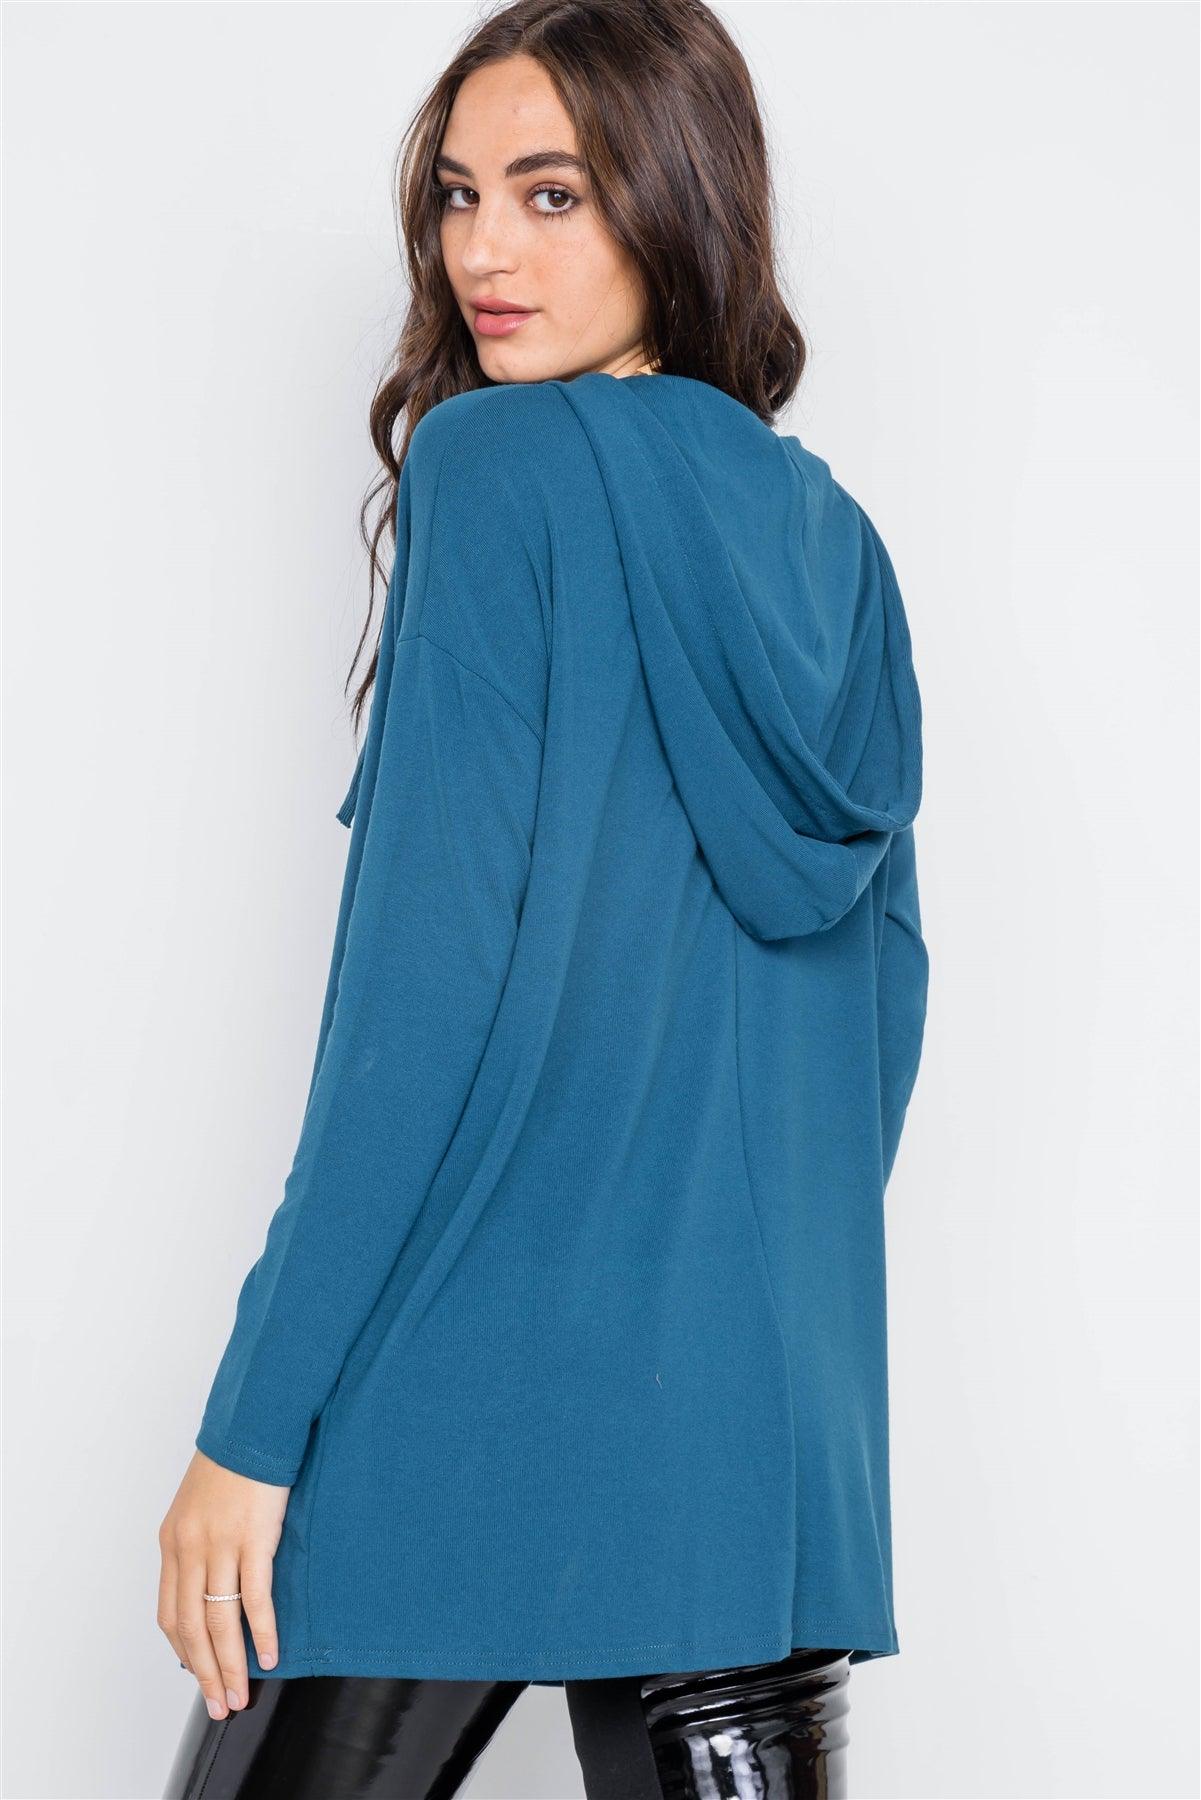 Teal Knit Long Sleeve Hooded Solid Sweater /2-2-2